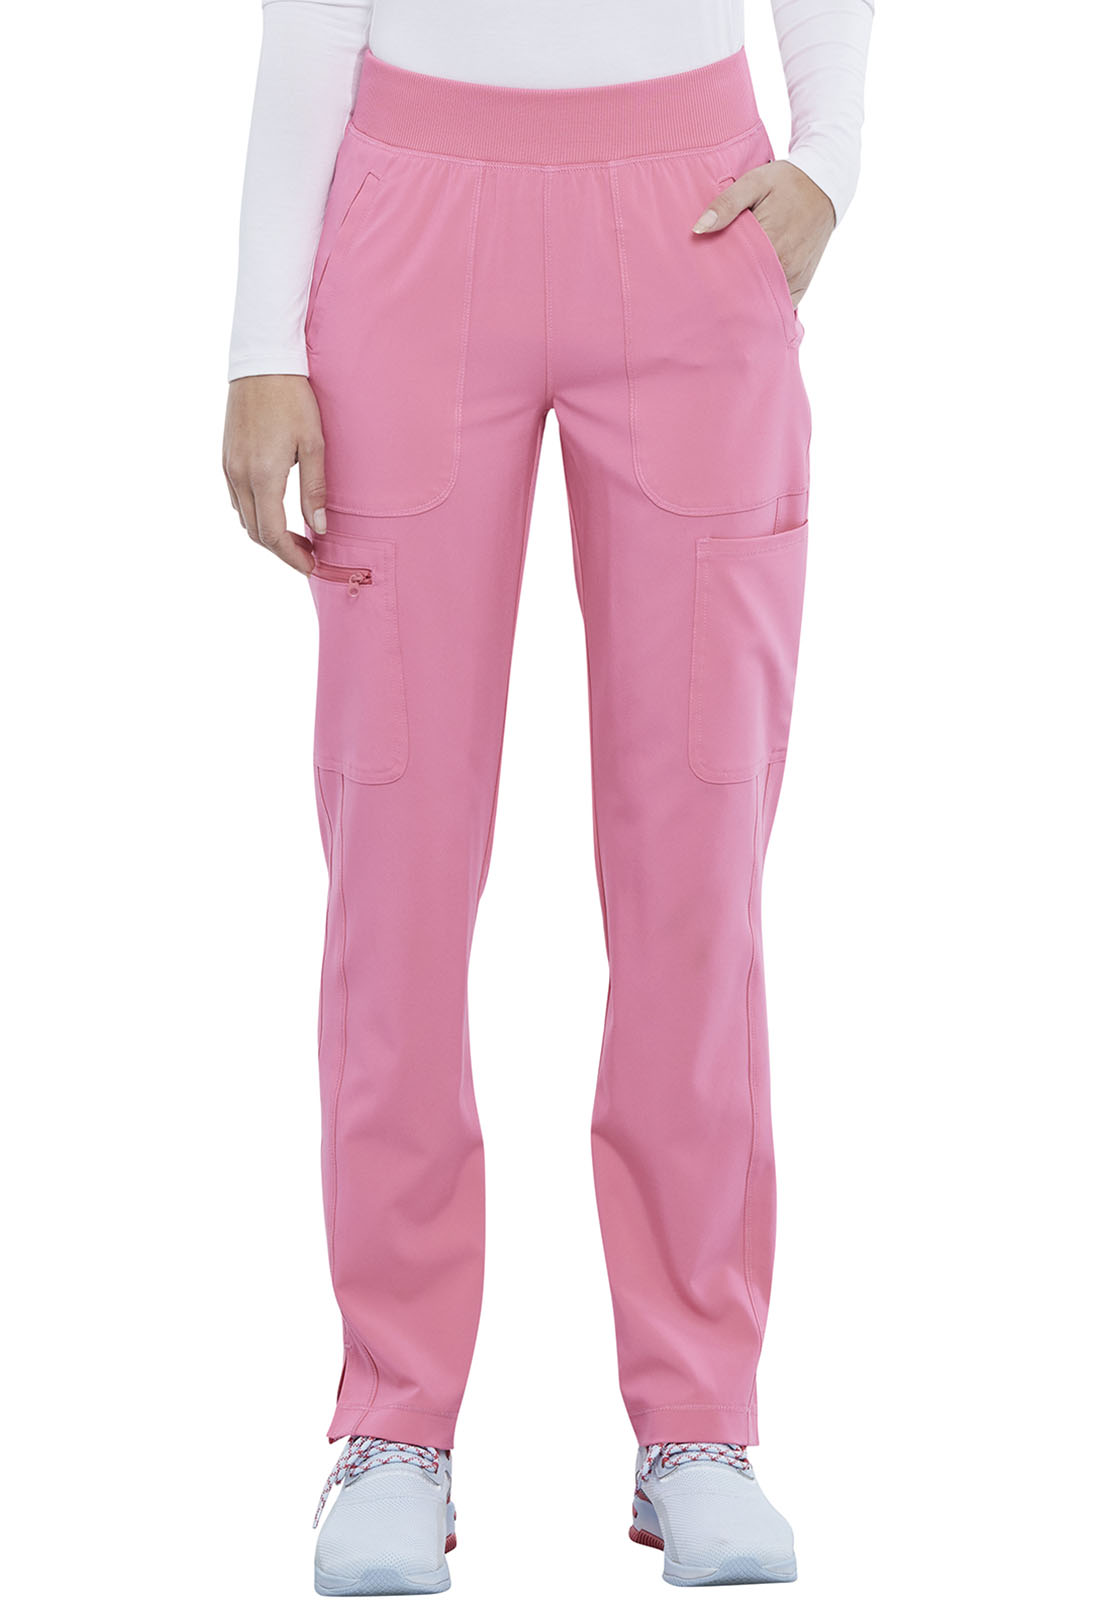 Infinity Mid Rise Tapered Leg Pull-on Pant in Miami Pink CK065AP-MXPK ...